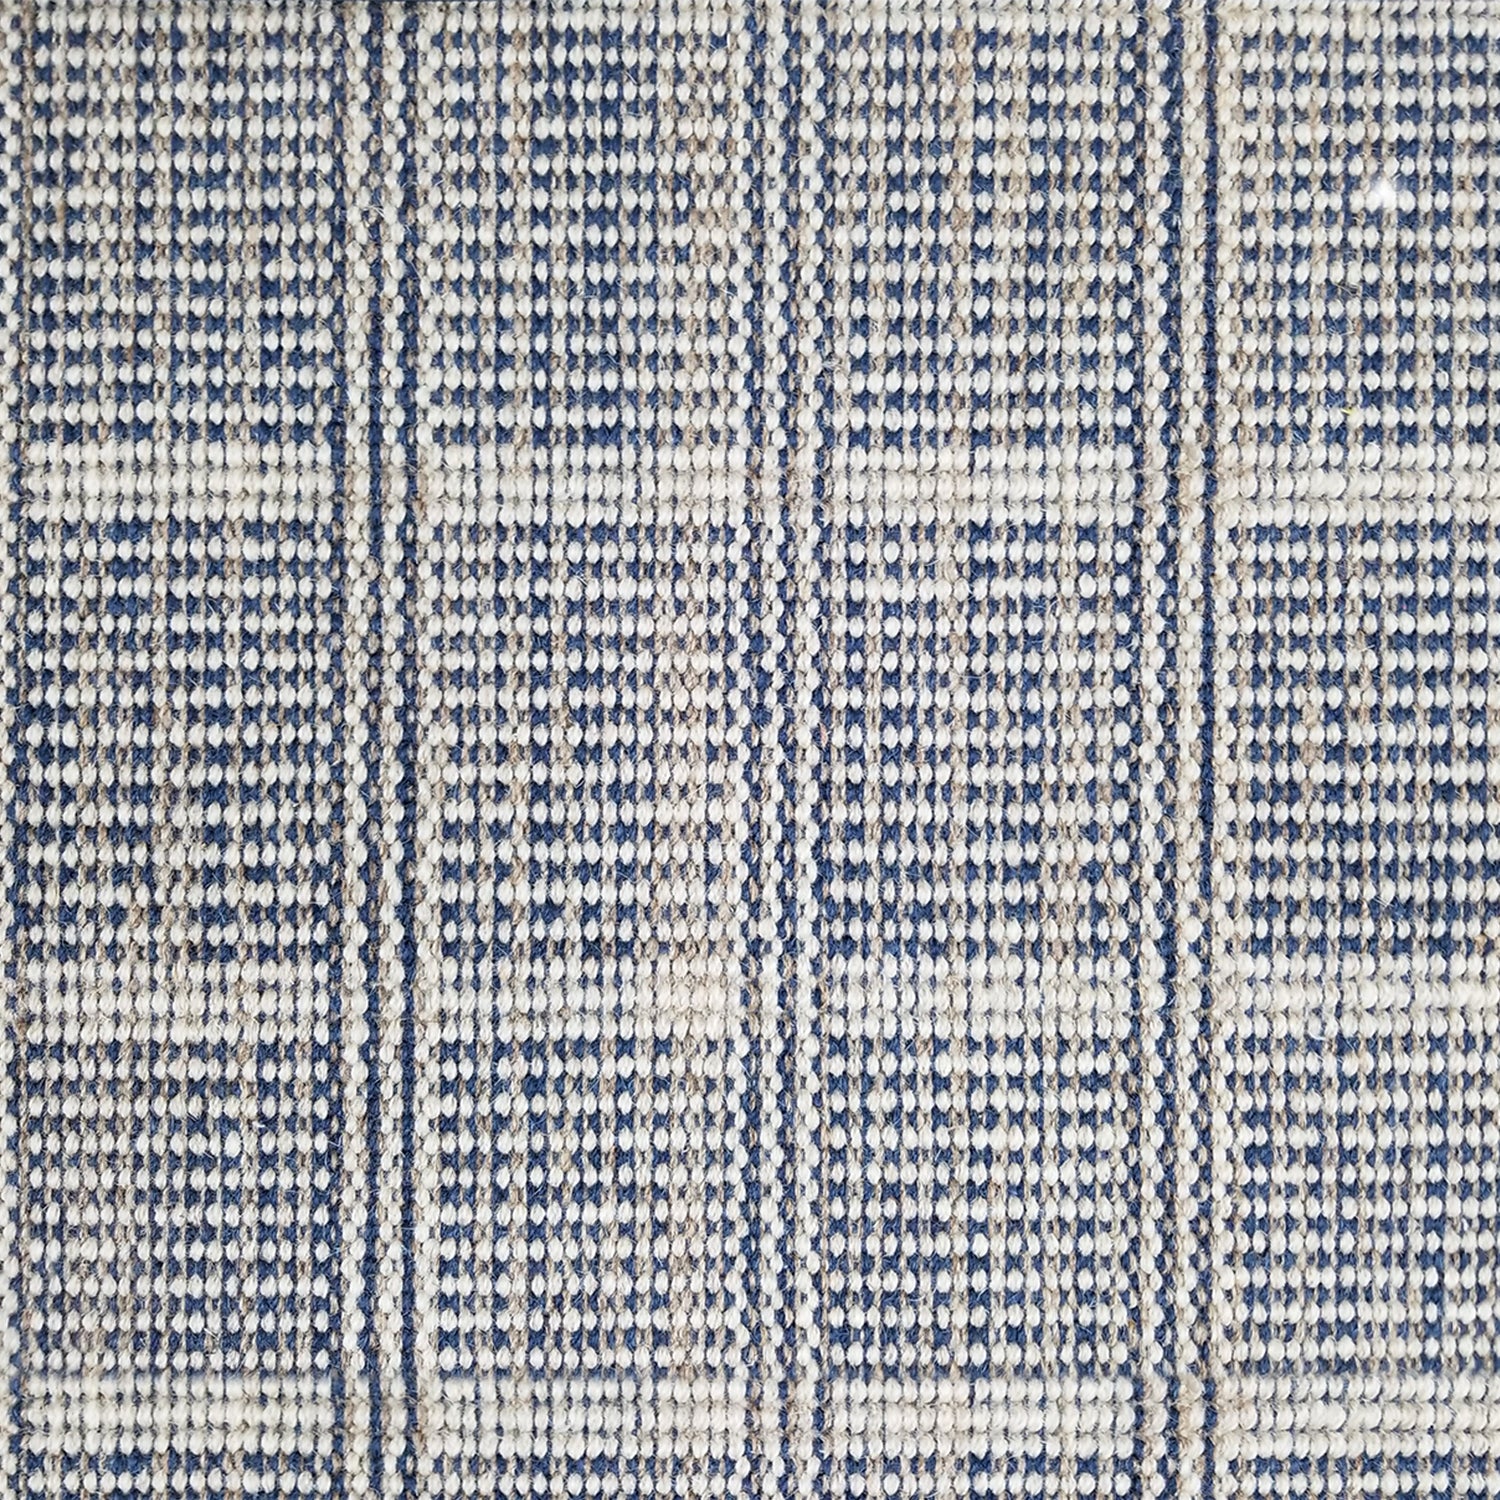 Wool broadloom carpet swatch in a plaid print in shades of navy, tan and cream.